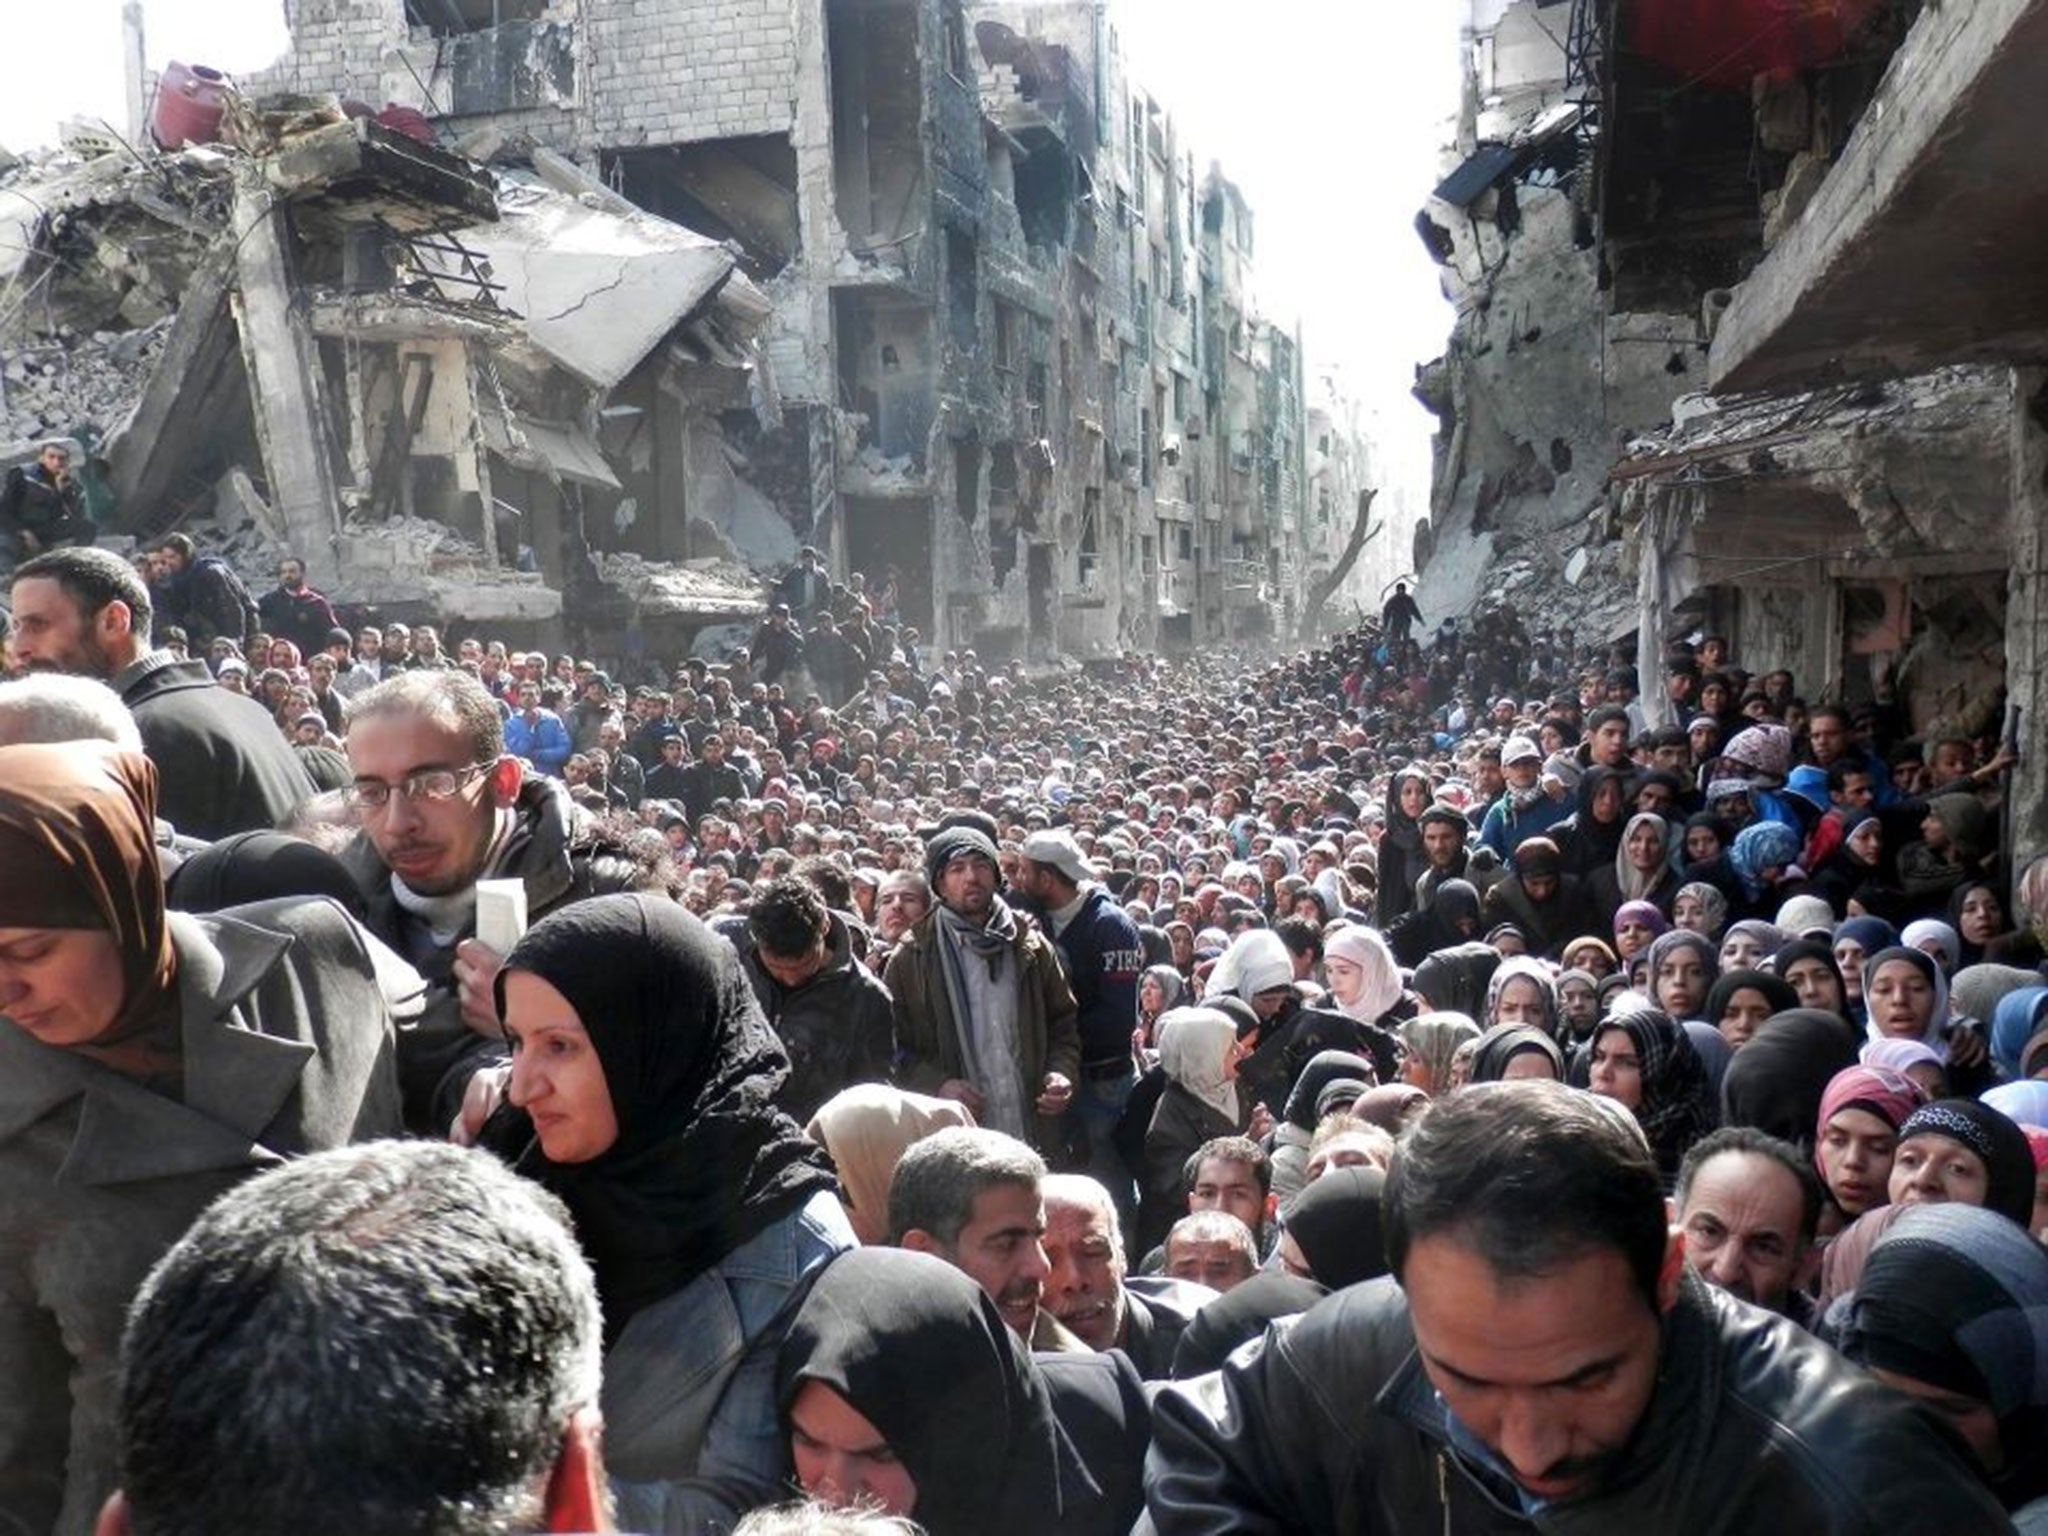 Palestinian refugees shown queuing for food supplies in the Yarmouk refugee camp last year